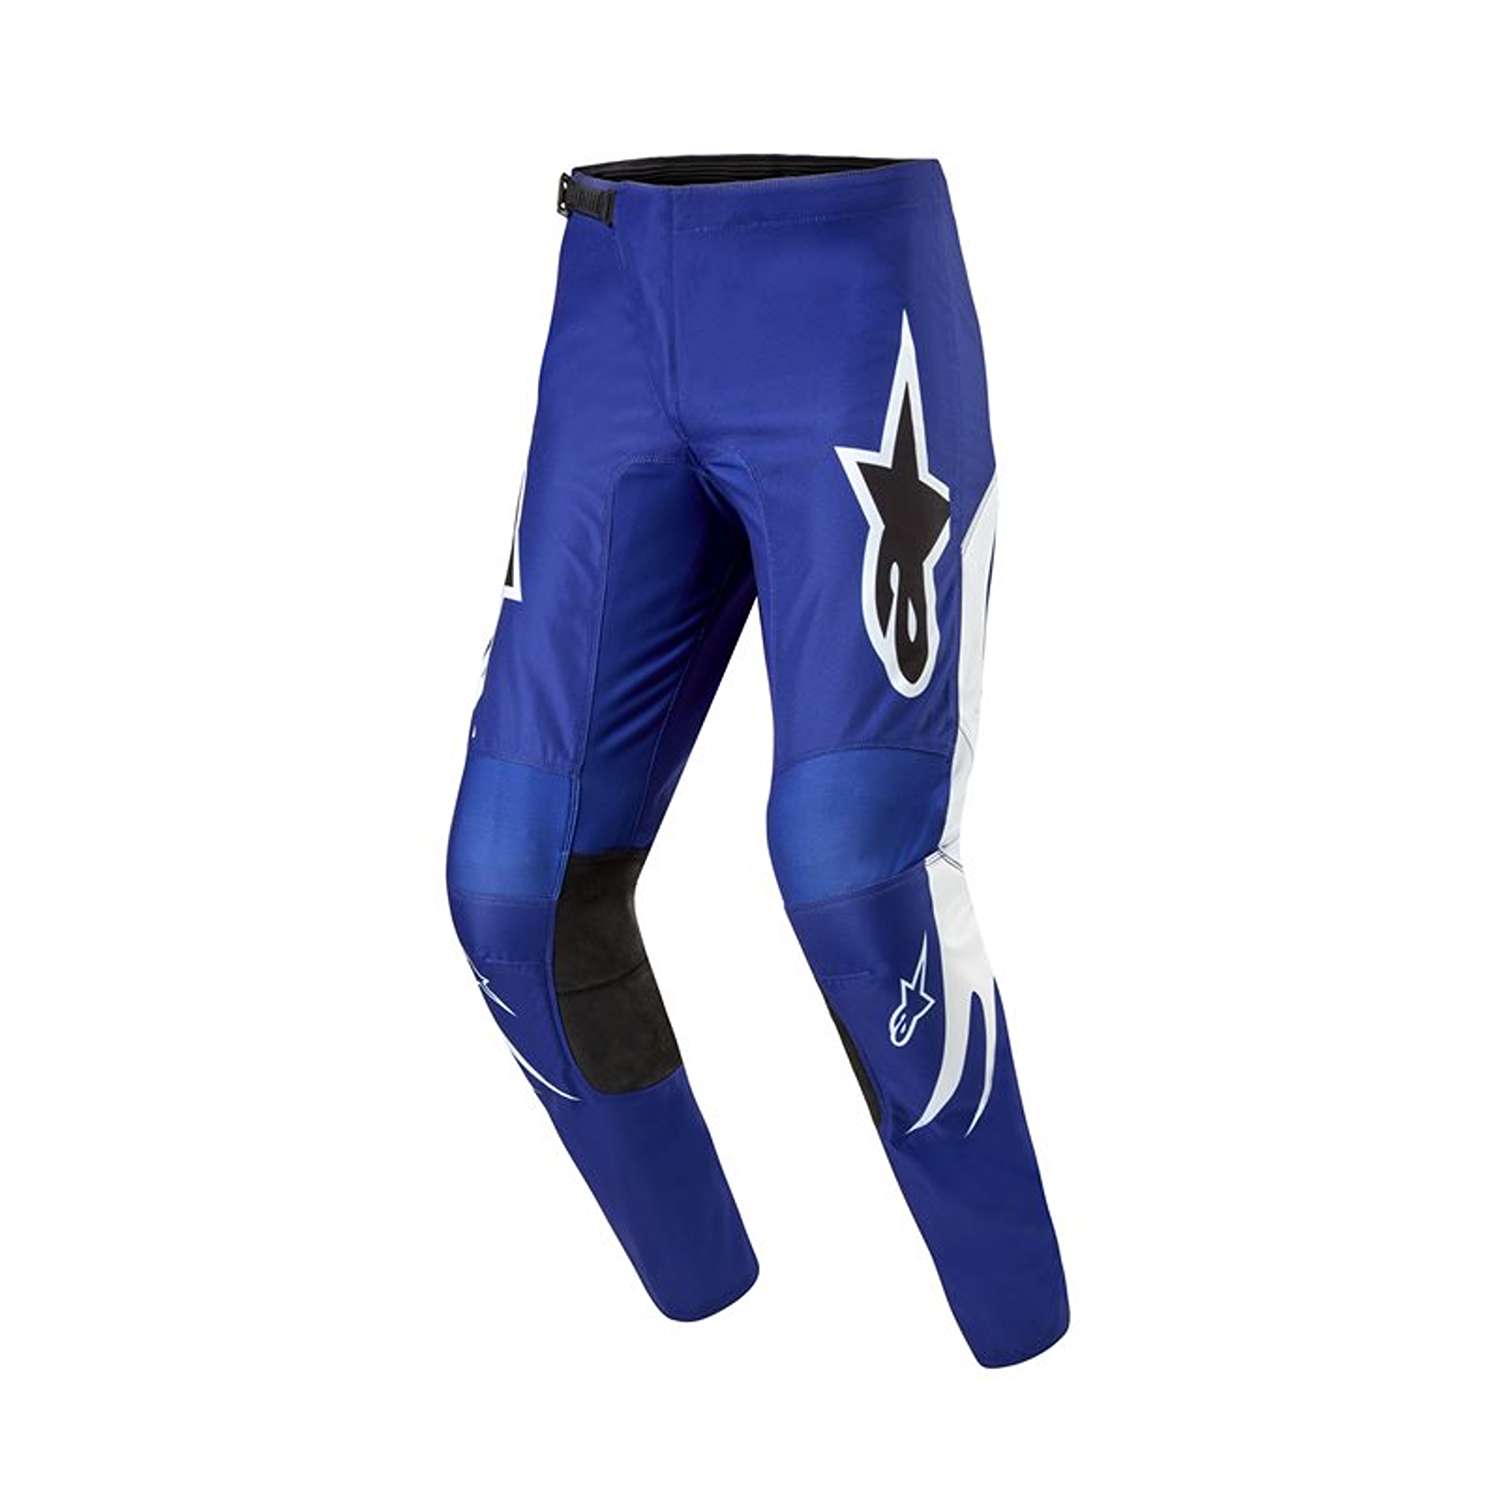 Image of EU Alpinestars Fluid Lucent Pants Blue Ray White Taille 30